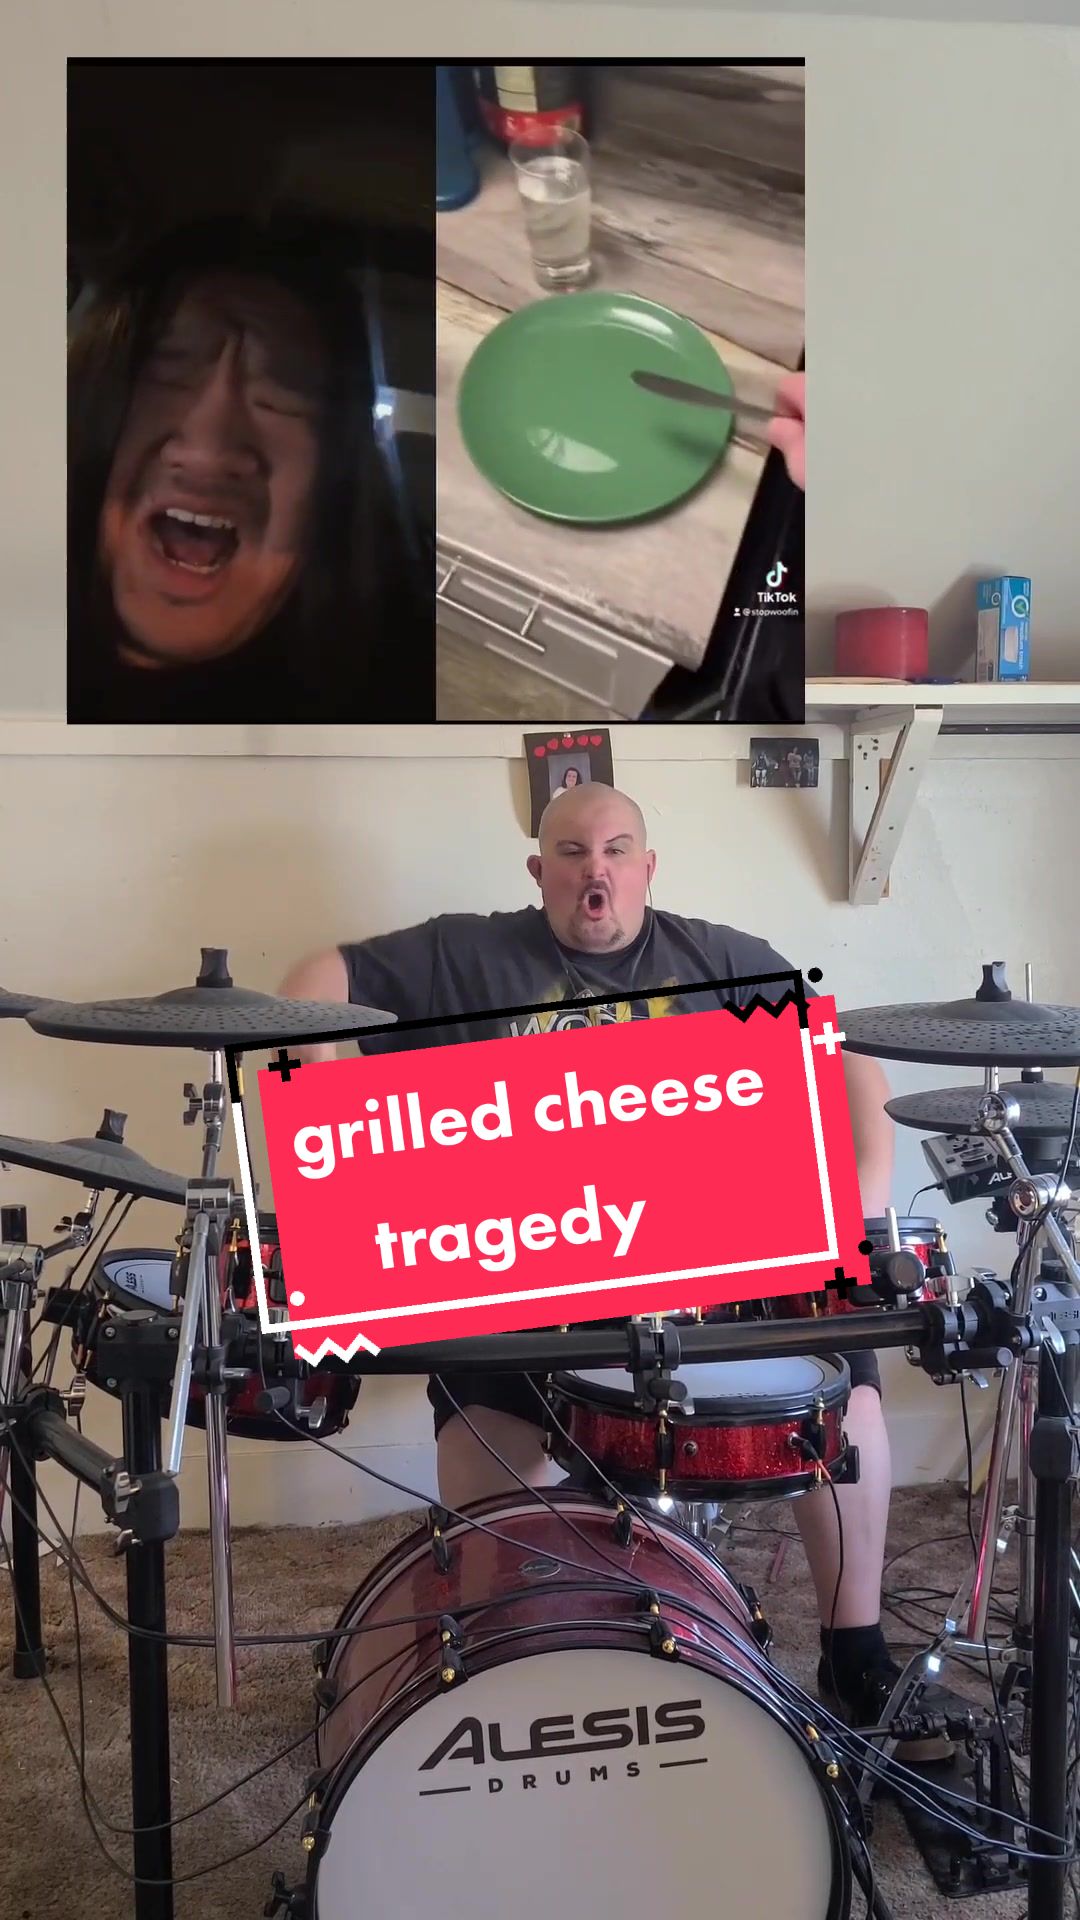 A truly heartbreaking story.  #grilledcheese #metaldrummer #sadstory created by David Paradis with David Paradis's original sound